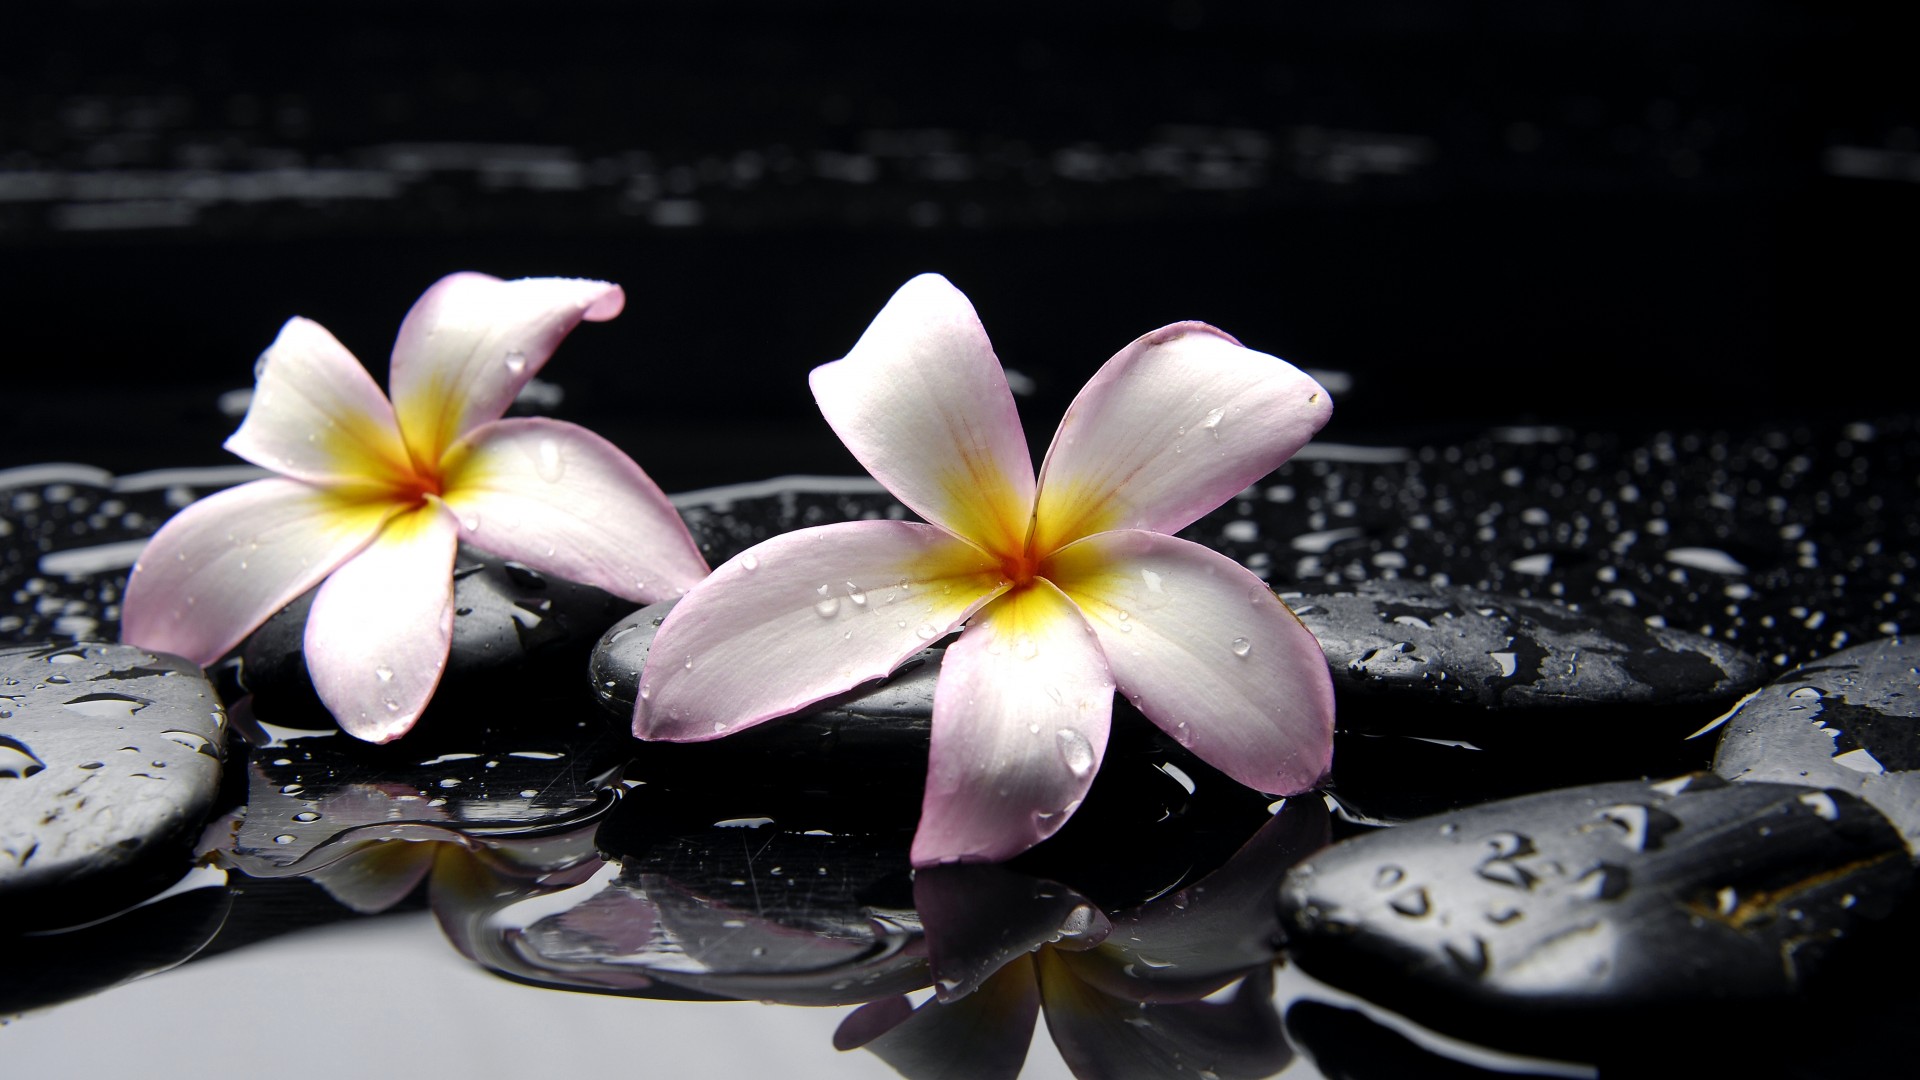 earth, frangipani, flower cell phone wallpapers